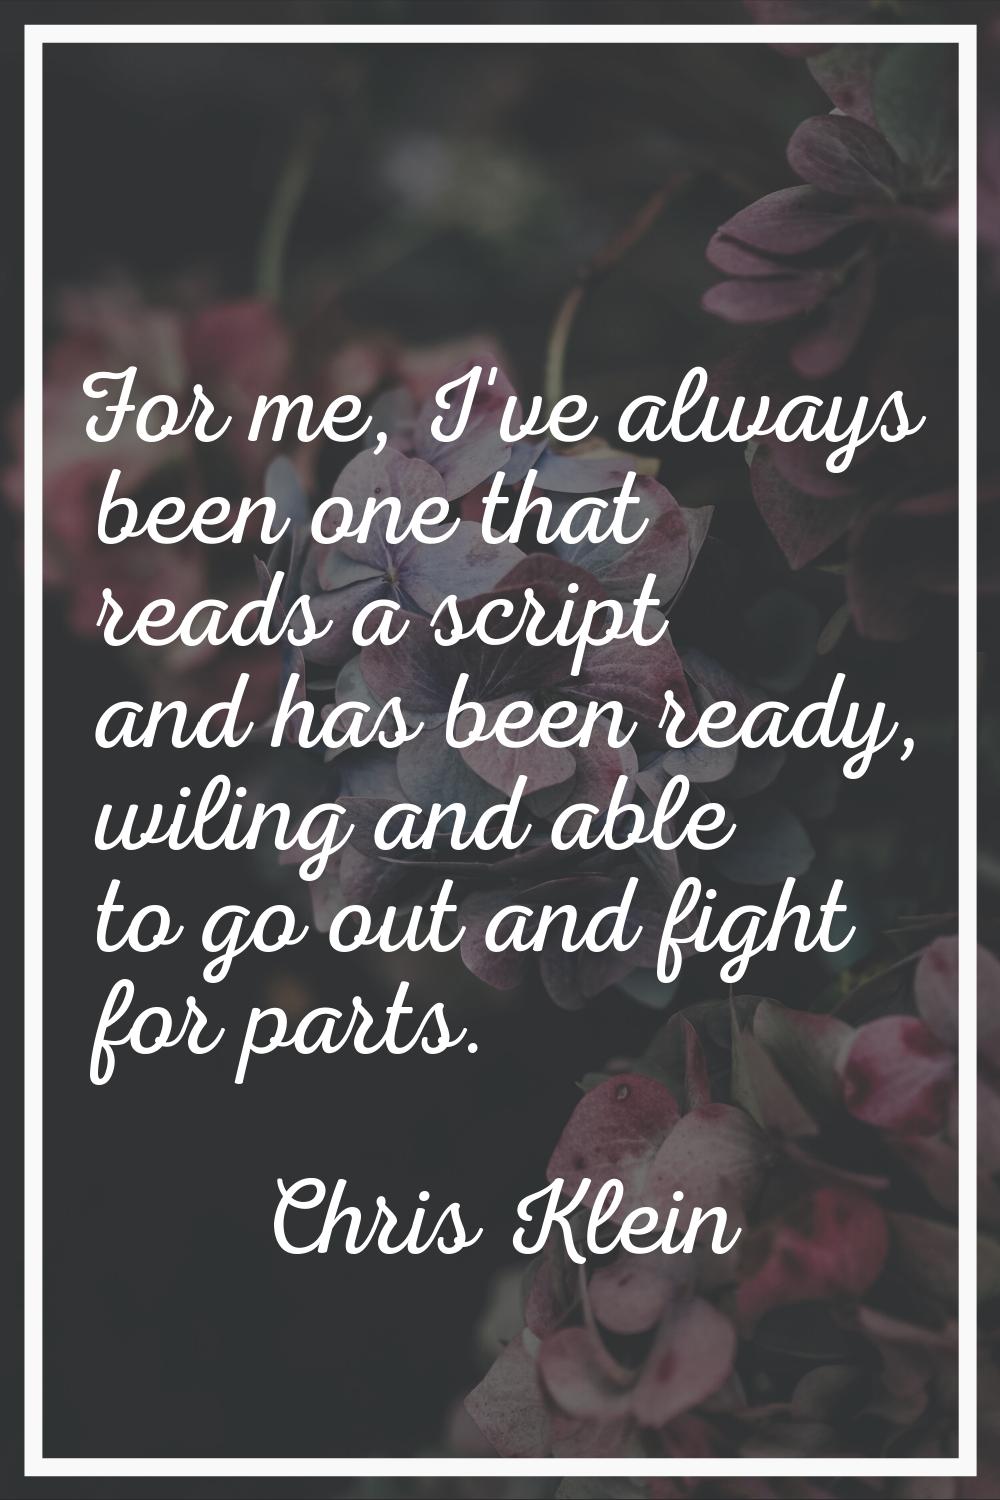 For me, I've always been one that reads a script and has been ready, wiling and able to go out and 